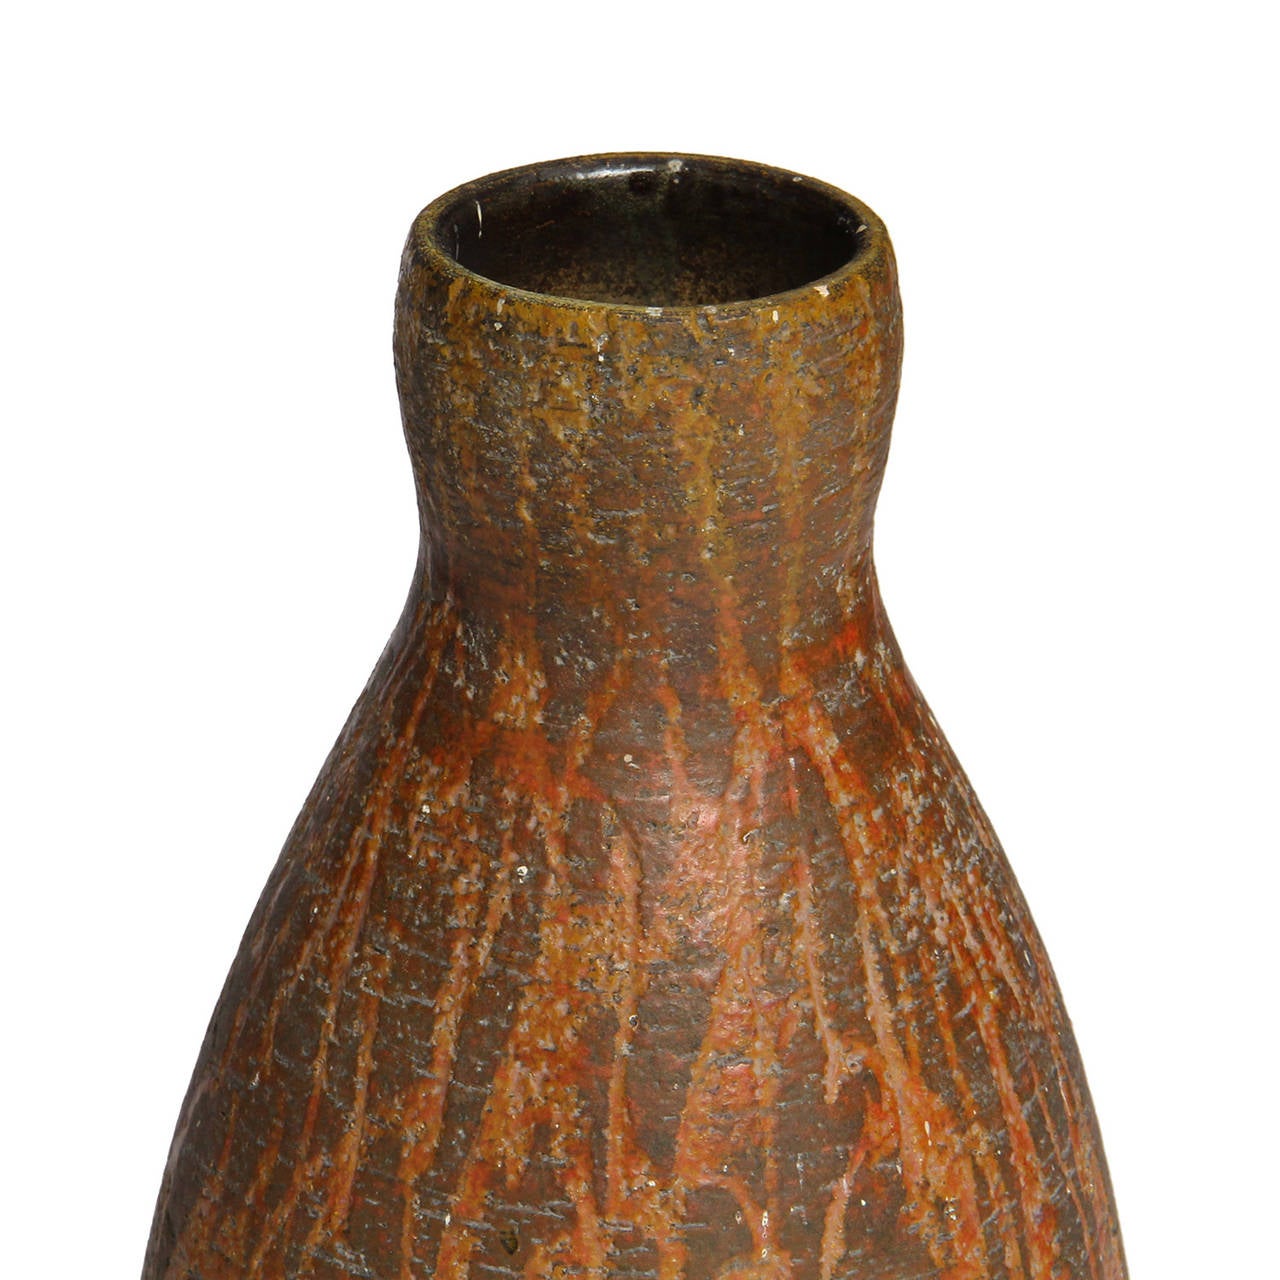 A well scaled unique ceramic baluster form vase having a highly expressive all-over incised abstract decoration.